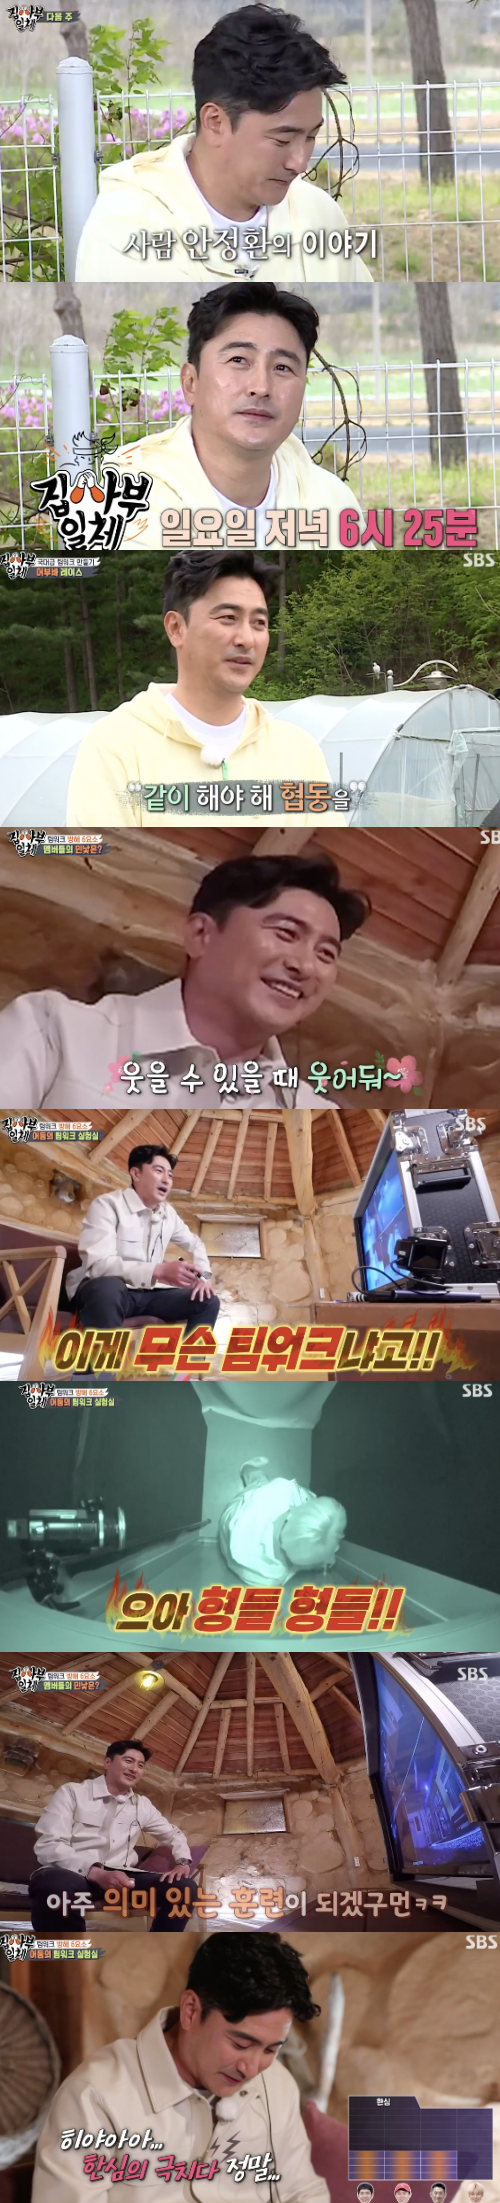 In All The Butlers, Ahn Jung-hwan handed over the teamwork training of the national treasure class Sparta, and surprise Confessions that he was about to quit broadcasting were announced, which doubled fans curiosity.Master Ahn Jung-hwan appeared on SBS entertainment All The Butlers on the 9th.On this day, Master Ahn Jung-hwan said he will teach teamwork with 22 years of experience of 14 years of soccer and 8 years of entertainment.Ahn Jung-hwan said, All The Butlers members like teamwork, but I really need to see it once.It is good to work, and in extreme situations, peoples nature comes out, he said.Ahn Jung-hwan said, The coaches appreciate the psychological judgment when they see the player.I think about the sacrifice spirit or the team, he said. In fact, I was very individualistic.I was selfish and I only knew it. I was surprised to hear that I became a person through this training.Lee Seung-gi, Cha Eun-woo, Yang Se-hyeong and Kim Dong-Hyun arrived except for Shin Seong-rok.Cha Eun-woo, who was last in the scissors rocks, was the leader in the bet on who would go first in the spooky space.When someone led the way first, Ahn Jung-hwan laughed, watching it, saying, There is no one who goes first.In earnest, Ahn Jung-hwan appeared in front of the members, and he handed a teamwork report for 21 seasons, watching the plan card No individual is greater than the team.Ahn Jung-hwan said, Tomorrow we need harsh and hard teamwork training. There is a similar point in entertainment to soccer.We need leaders, and like football, teamwork is life, and we have been taught a lot about the importance of teamwork for a lifetime.It will be hard enough to want to broadcast so far, so you can get out now. The next day the members gathered again, and Ahn Jung-hwan said they would wash each other.Yang Se-hyeong and Lee Seung-gi, Cha Eun-woo and Kim Dong-Hyun decided to team up.Ahn Jung-hwan said, The two of them will become one, and the start of the teamwork was a group of two, opening the prelude to the training of hell.All of them were full of comrades and took care of each other.Ahn Jung-hwan also said, This is a warm-up game, but I am already tired of it. He said, I am becoming one now, trust my colleagues and leave my hands and feet.Next was a regular-age cooperative race, a two-man group of fishbooba races.Ahn Jung-hwan said, I have done everything, consideration and cooperation are important, and said that training points can be replaced if it is difficult.It was training that required sacrifice and consideration.The members shouted we are one. Eventually, Cha Eun-woo and Kim Dong-Hyun won.Ahn Jung-hwan concluded the training by saying, We had to do it together, we needed cooperation.On the other hand, while Ahn Jung-hwan and Spartas training continued as a national team of entertainment teamwork, Ahn Jung-hwan said, I originally thought I would not broadcast until next year.Capture All The Butlers Broadcast ScreenCapture All The Butlers Broadcast Screen